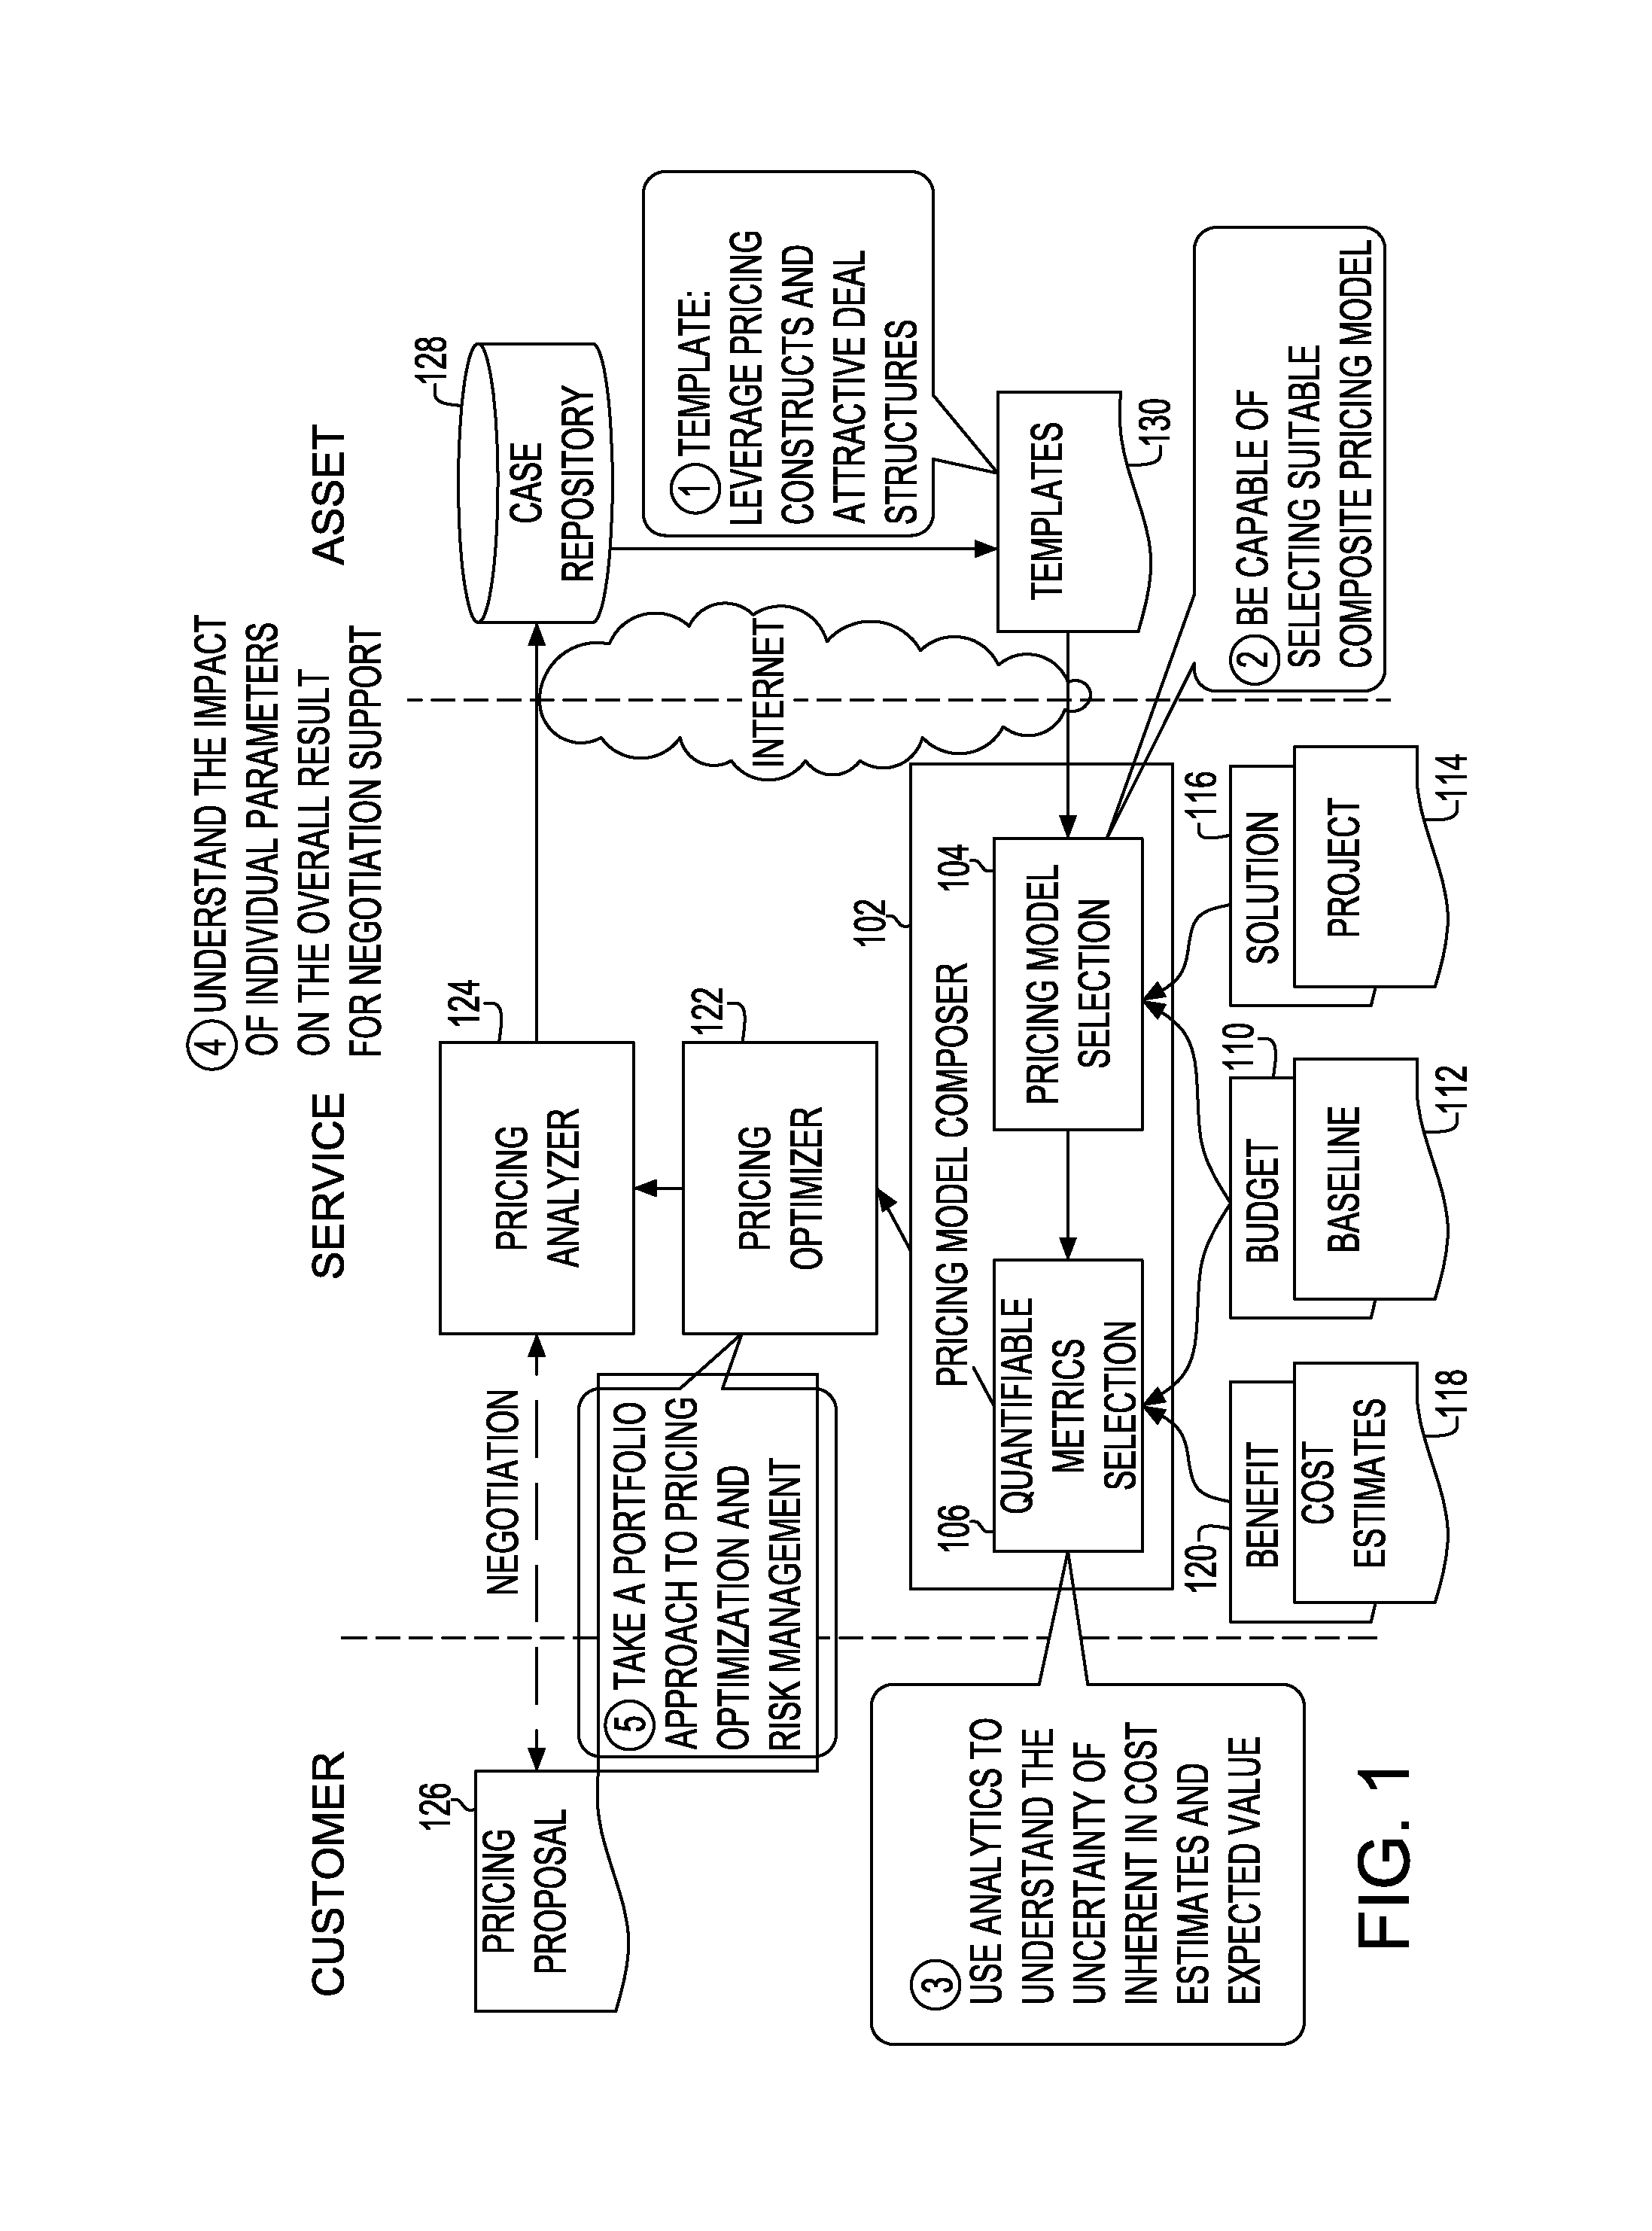 System and method for composite pricing of services to provide optimal bill schedule